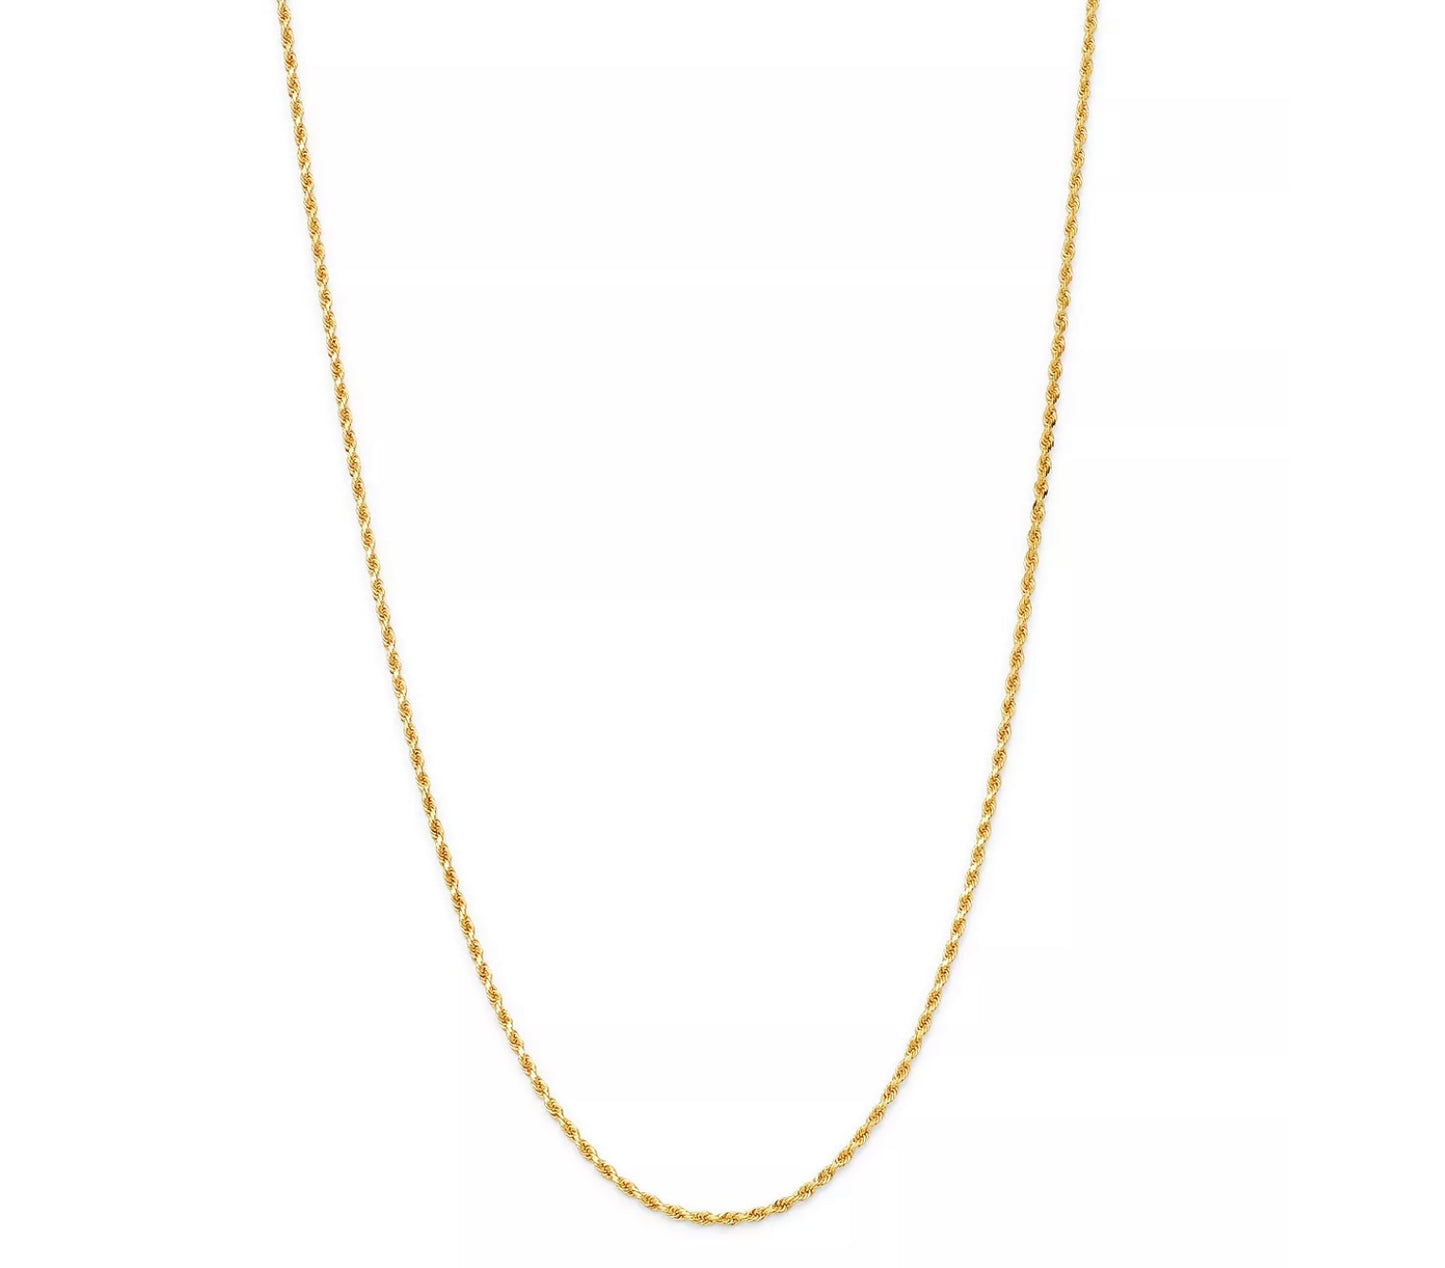 Solid Rope Link Chain Necklace in 14K Yellow Gold